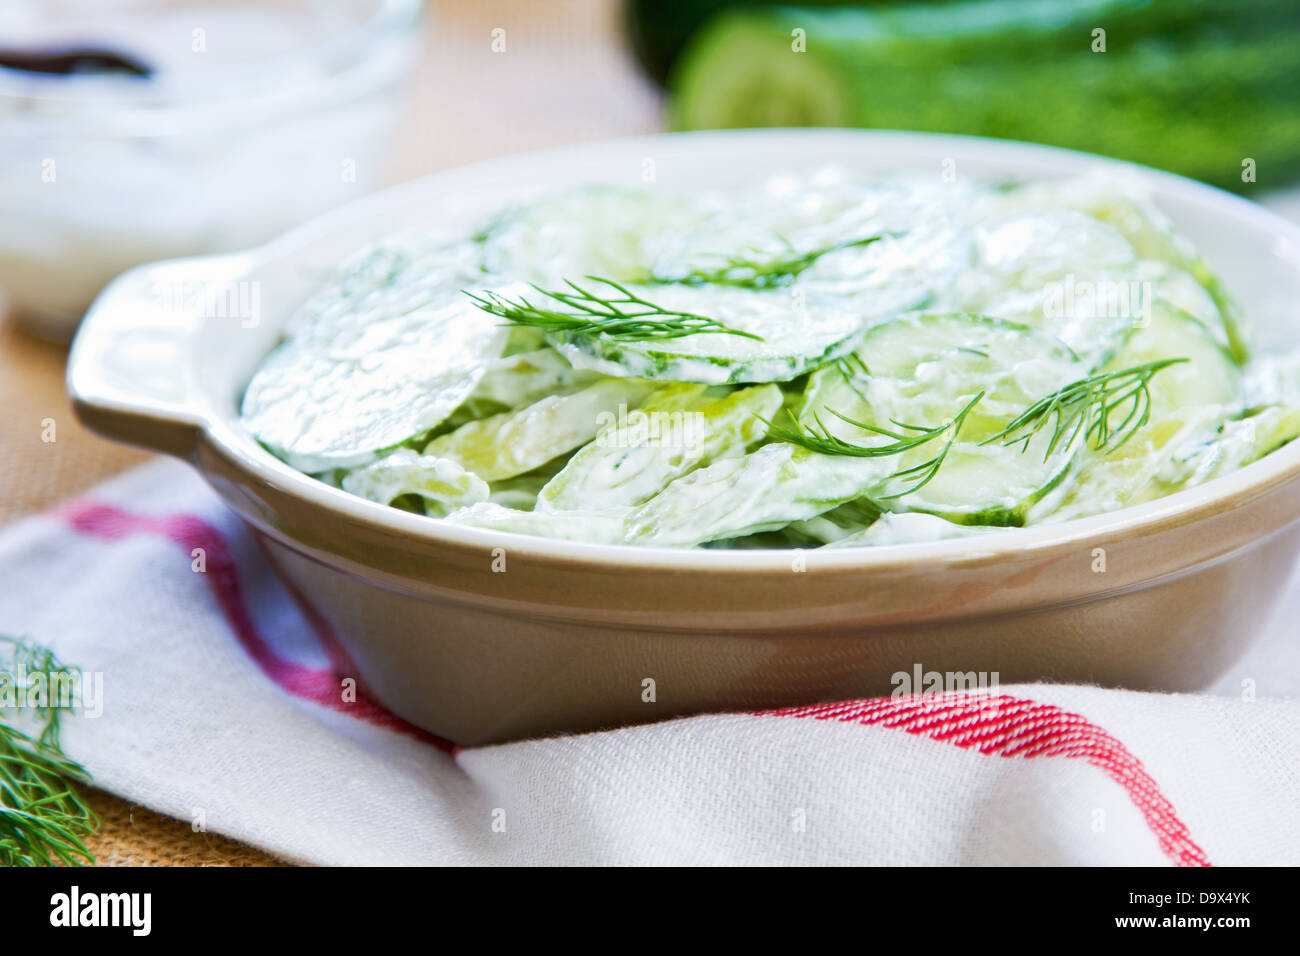 Cucumber with Celery and Dill salad in yogurt dressing Stock Photo